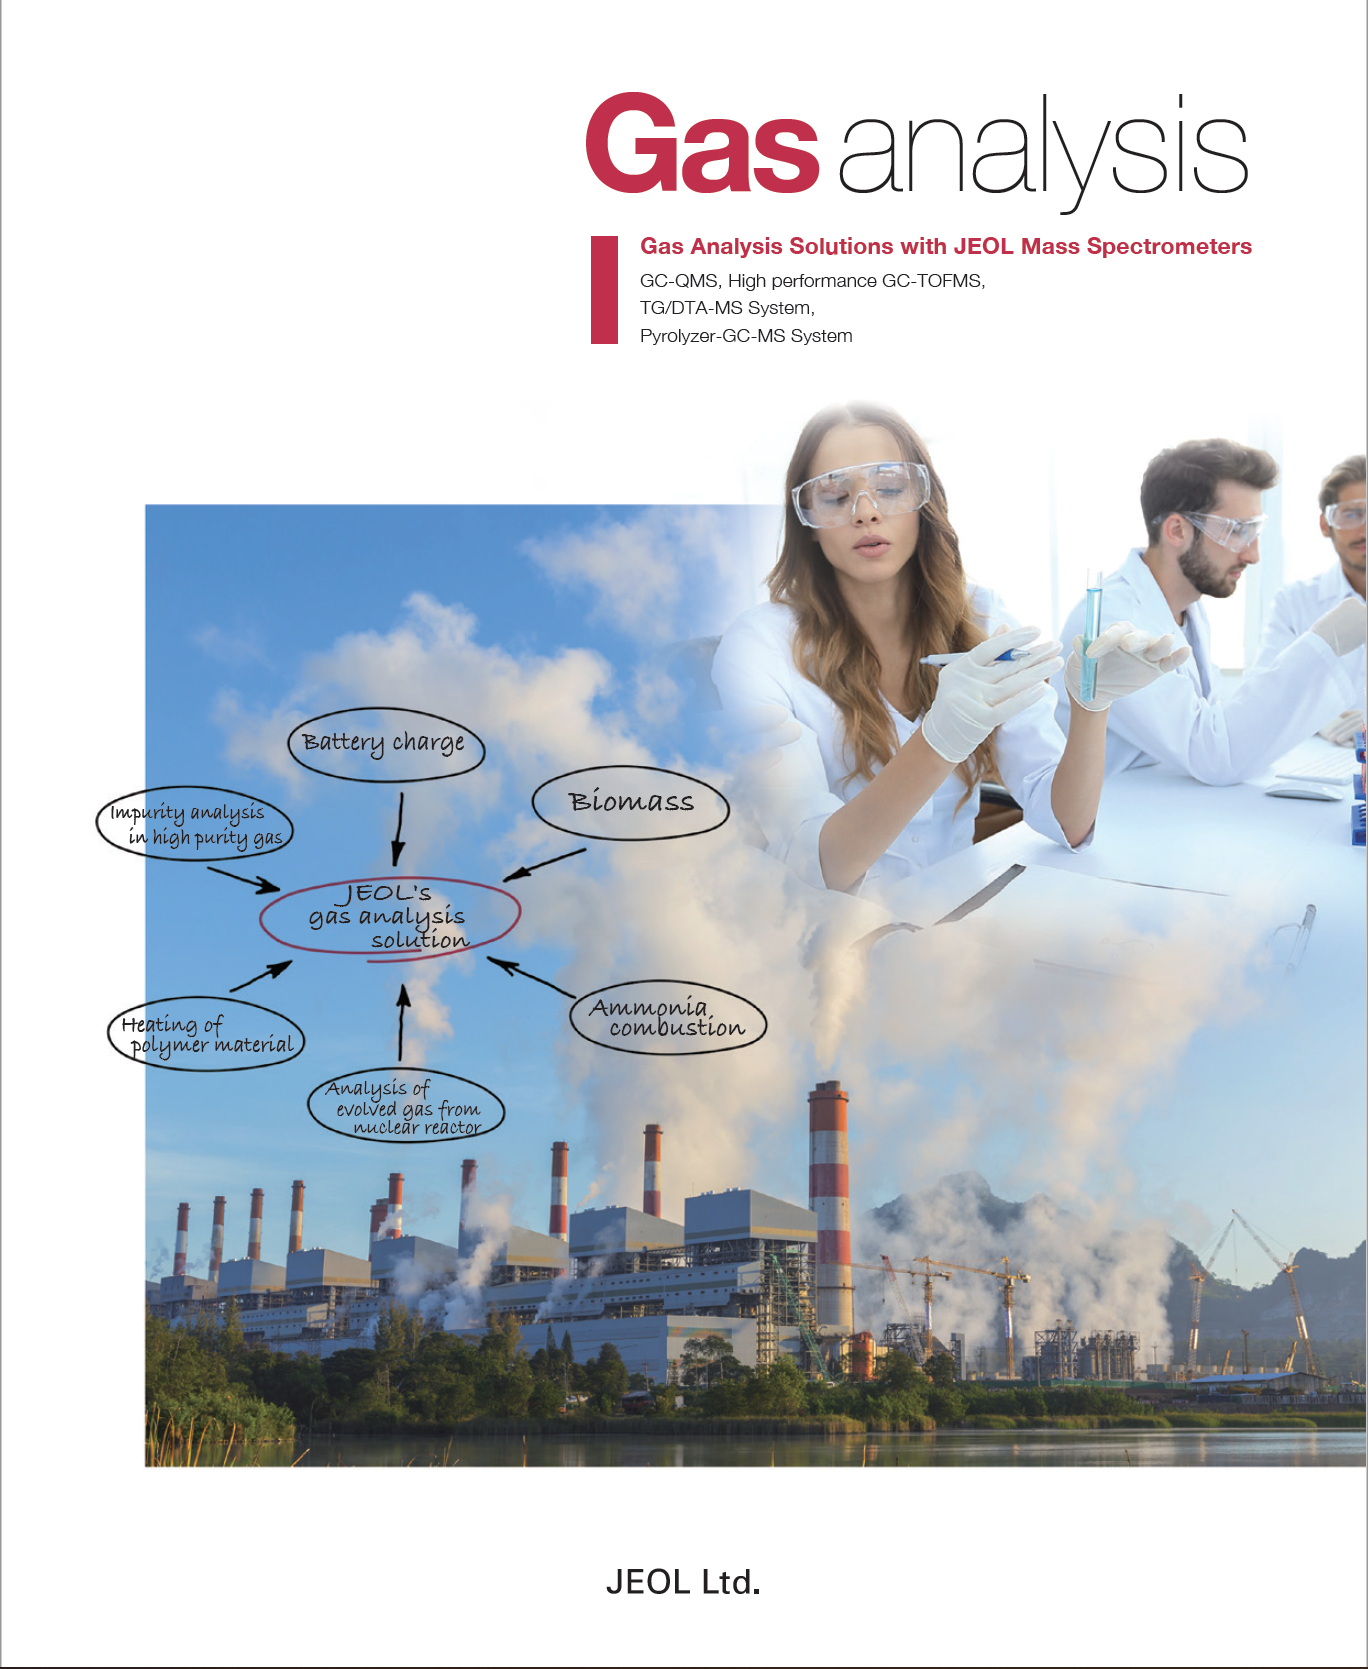 Download our Gas Analysis brochure